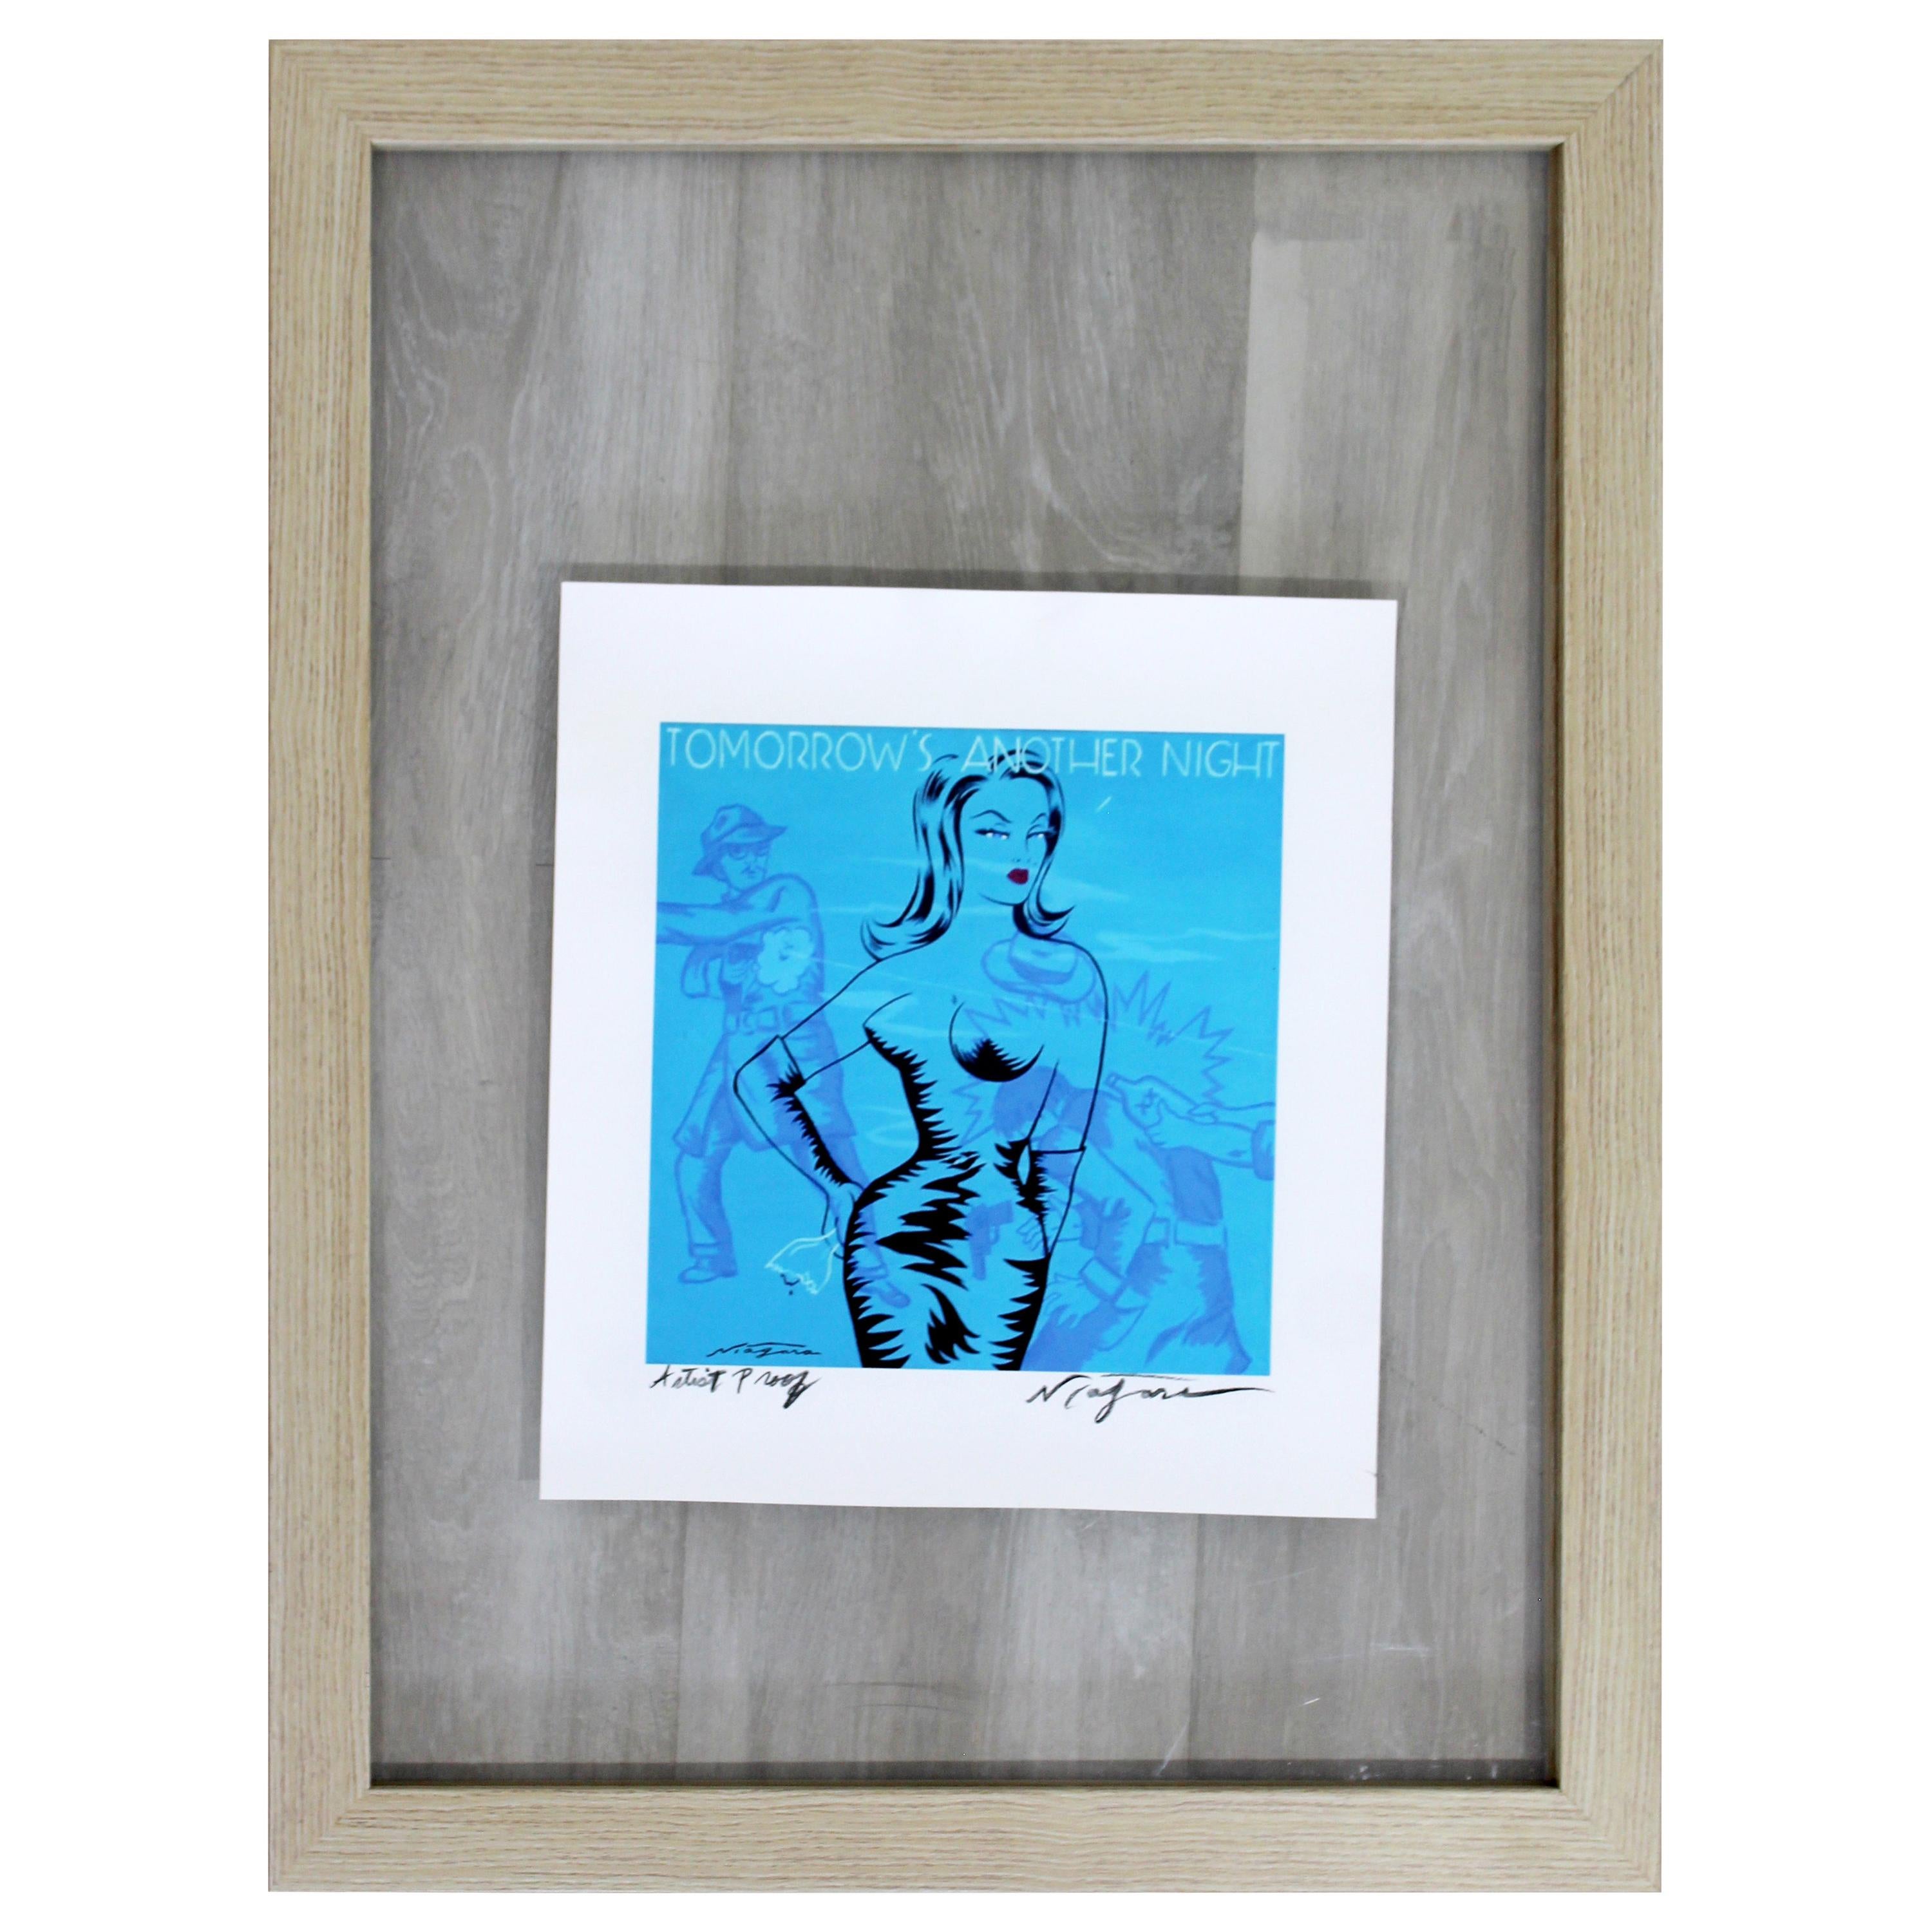 Contemporary Framed Niagara Signed a.P. Print Tomorrow's Another Night Blue